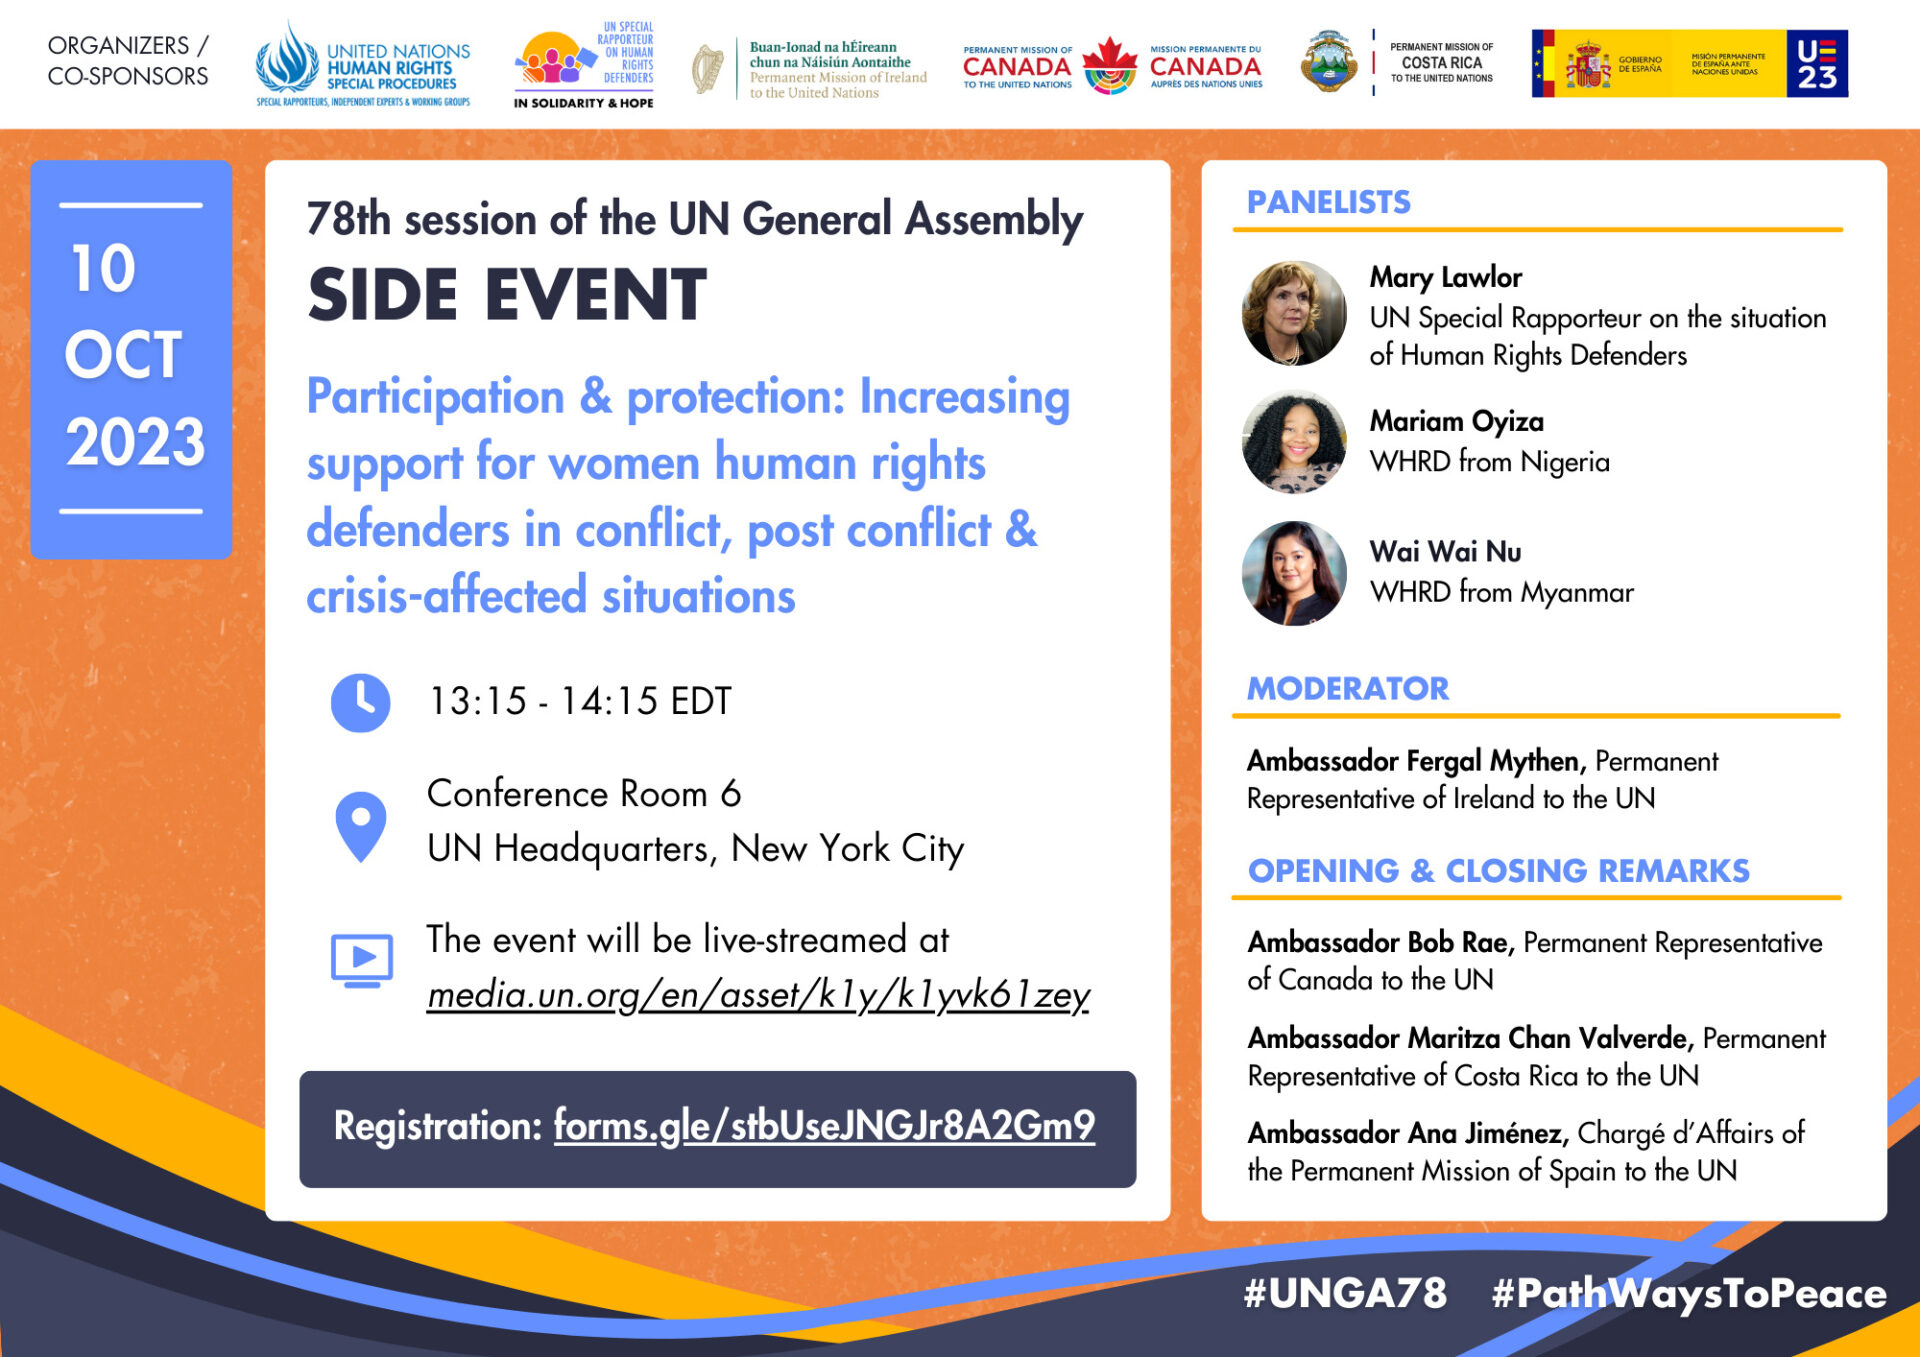 Flyer for the side event on 10 October 2023 in New York, titled "Participation and protection: Increasing support for WHRDs in conflict, post conflict and crisis-affected situations" Location: Conference Room 6, UN Headquarters, New York City, Time: 13:15-14:15 (EDT). The event will be live streamed media.un.org/en/webtv. Panelists are Mary Lawlor, UN Special Rapporteur on the situation of HRDs, Mariam Oyiza, a WHRD from Nigeria and Wai Wai Nu, a WHRD from Myanmar. Moderator will be Ambassador Fergal Mythen, Permanent Representative of Ireland to the UN. Opening Remarks will be given by Ambassador Bob Rae, Permanent Representative of Canada to the UN and Ambassador Maritza Chan Valverde, Permanent Representative of Costa Rica to the UN. Closing remarks will be given by Ambassador Ana Jiménez, Chargé d’Affairs of the Permanent Mission of Spain.